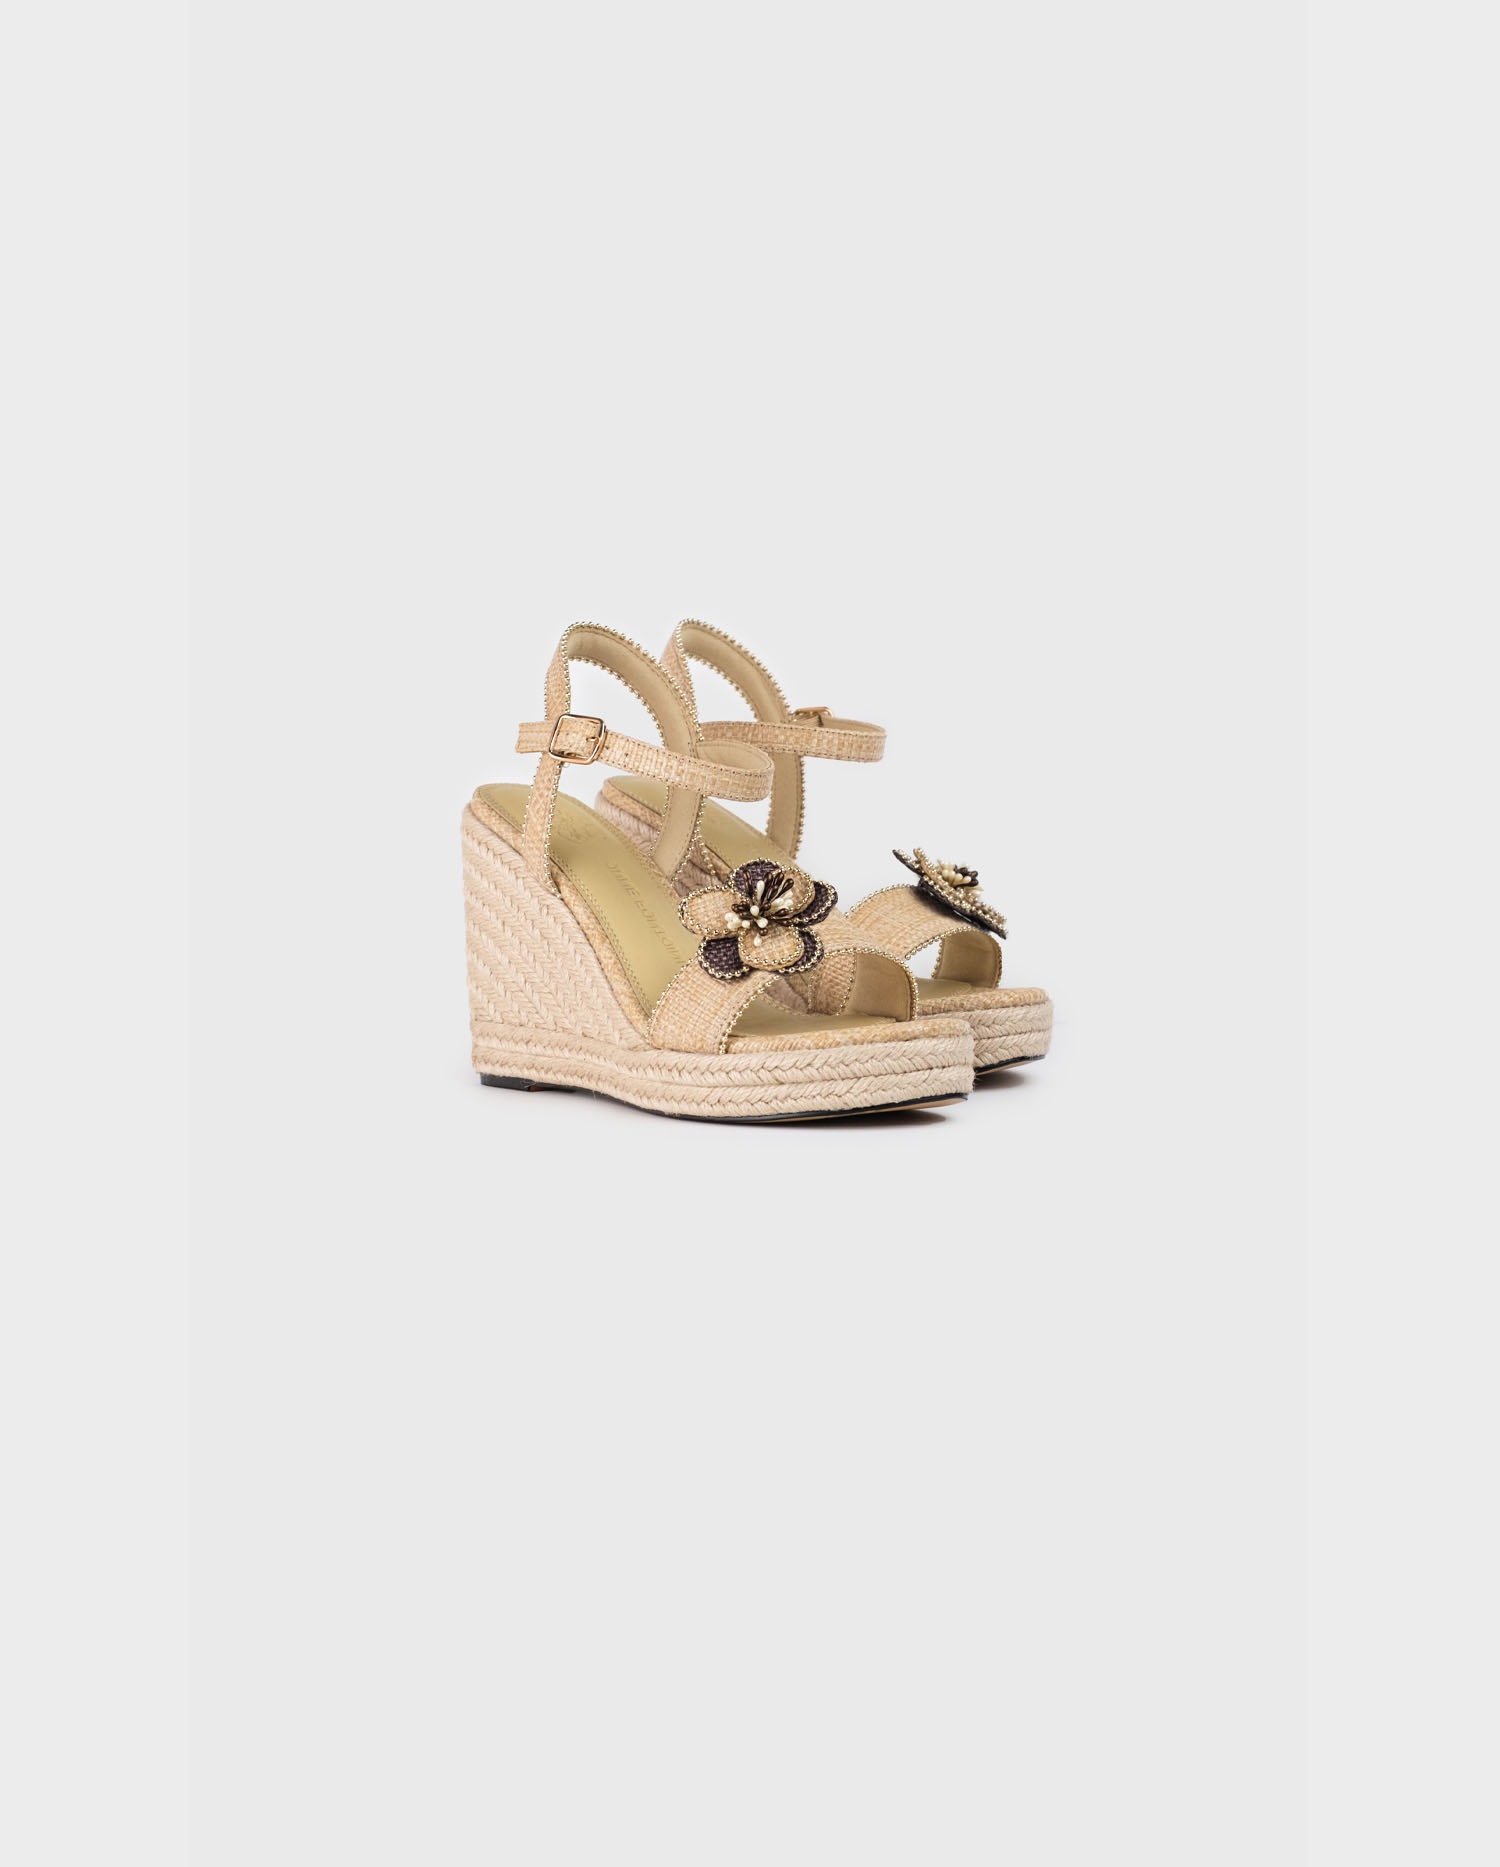 Discover the ONECA Natural Jute Espadrille Wedge Sandals from ANNE FONTAINE